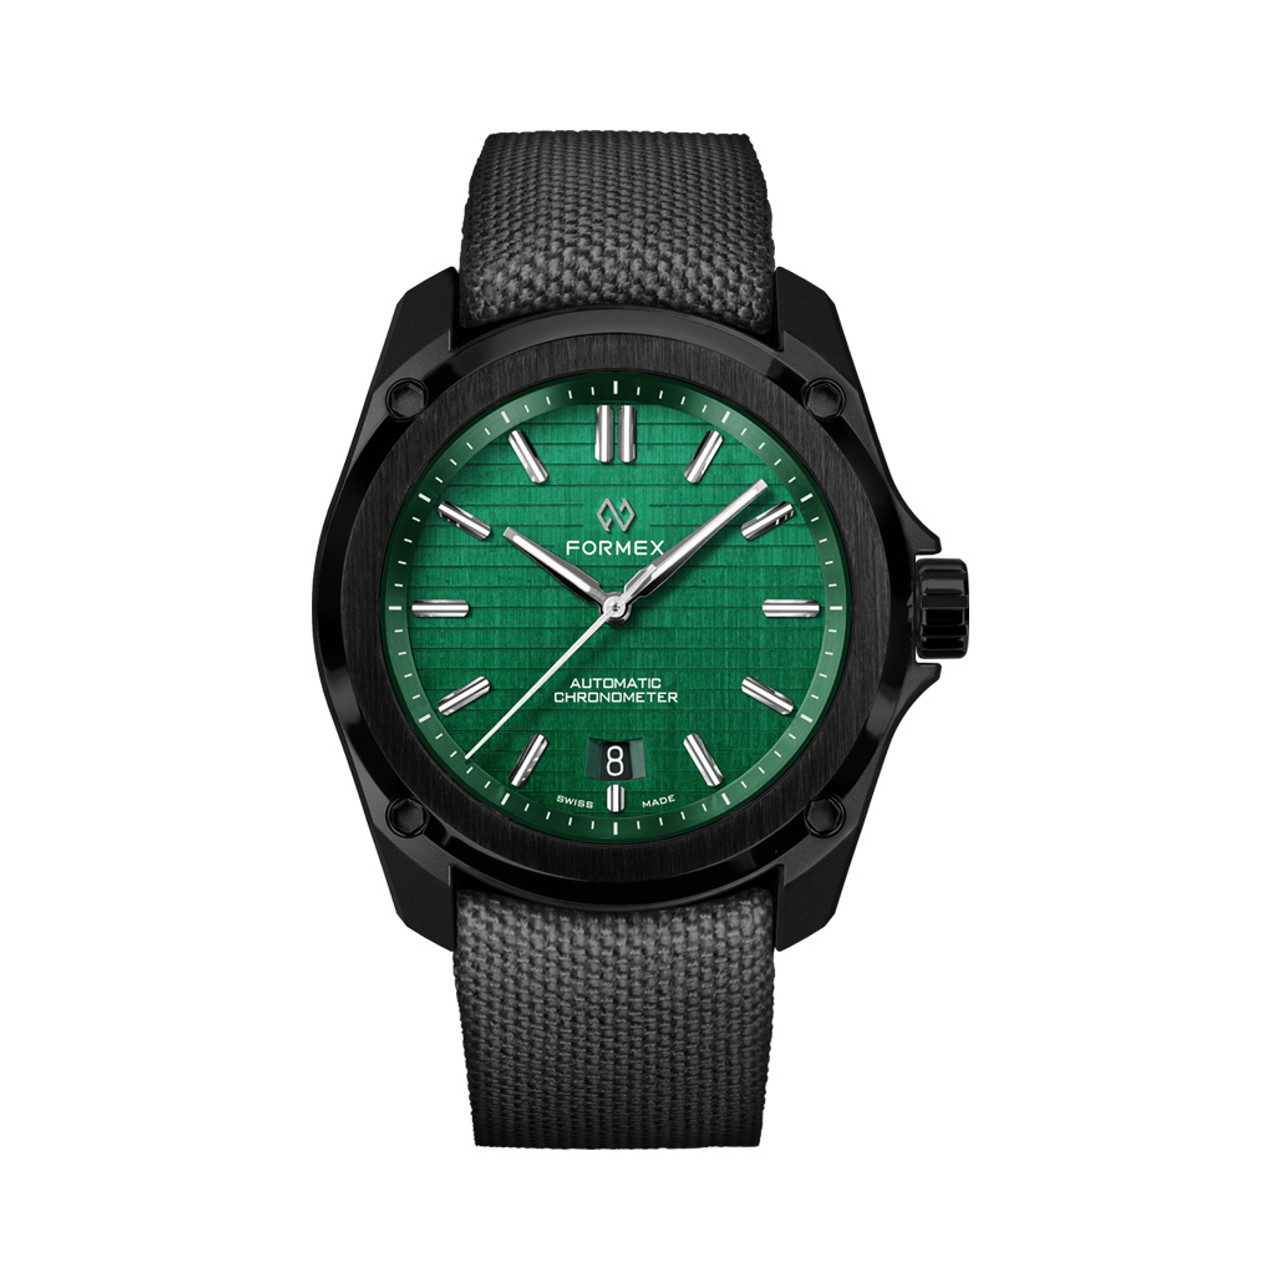 Formex Essence Leggera FortyOne (41mm) COSC Automatic Carbon Case Watch  with Mamba Green Dial #0331.4.6300.833